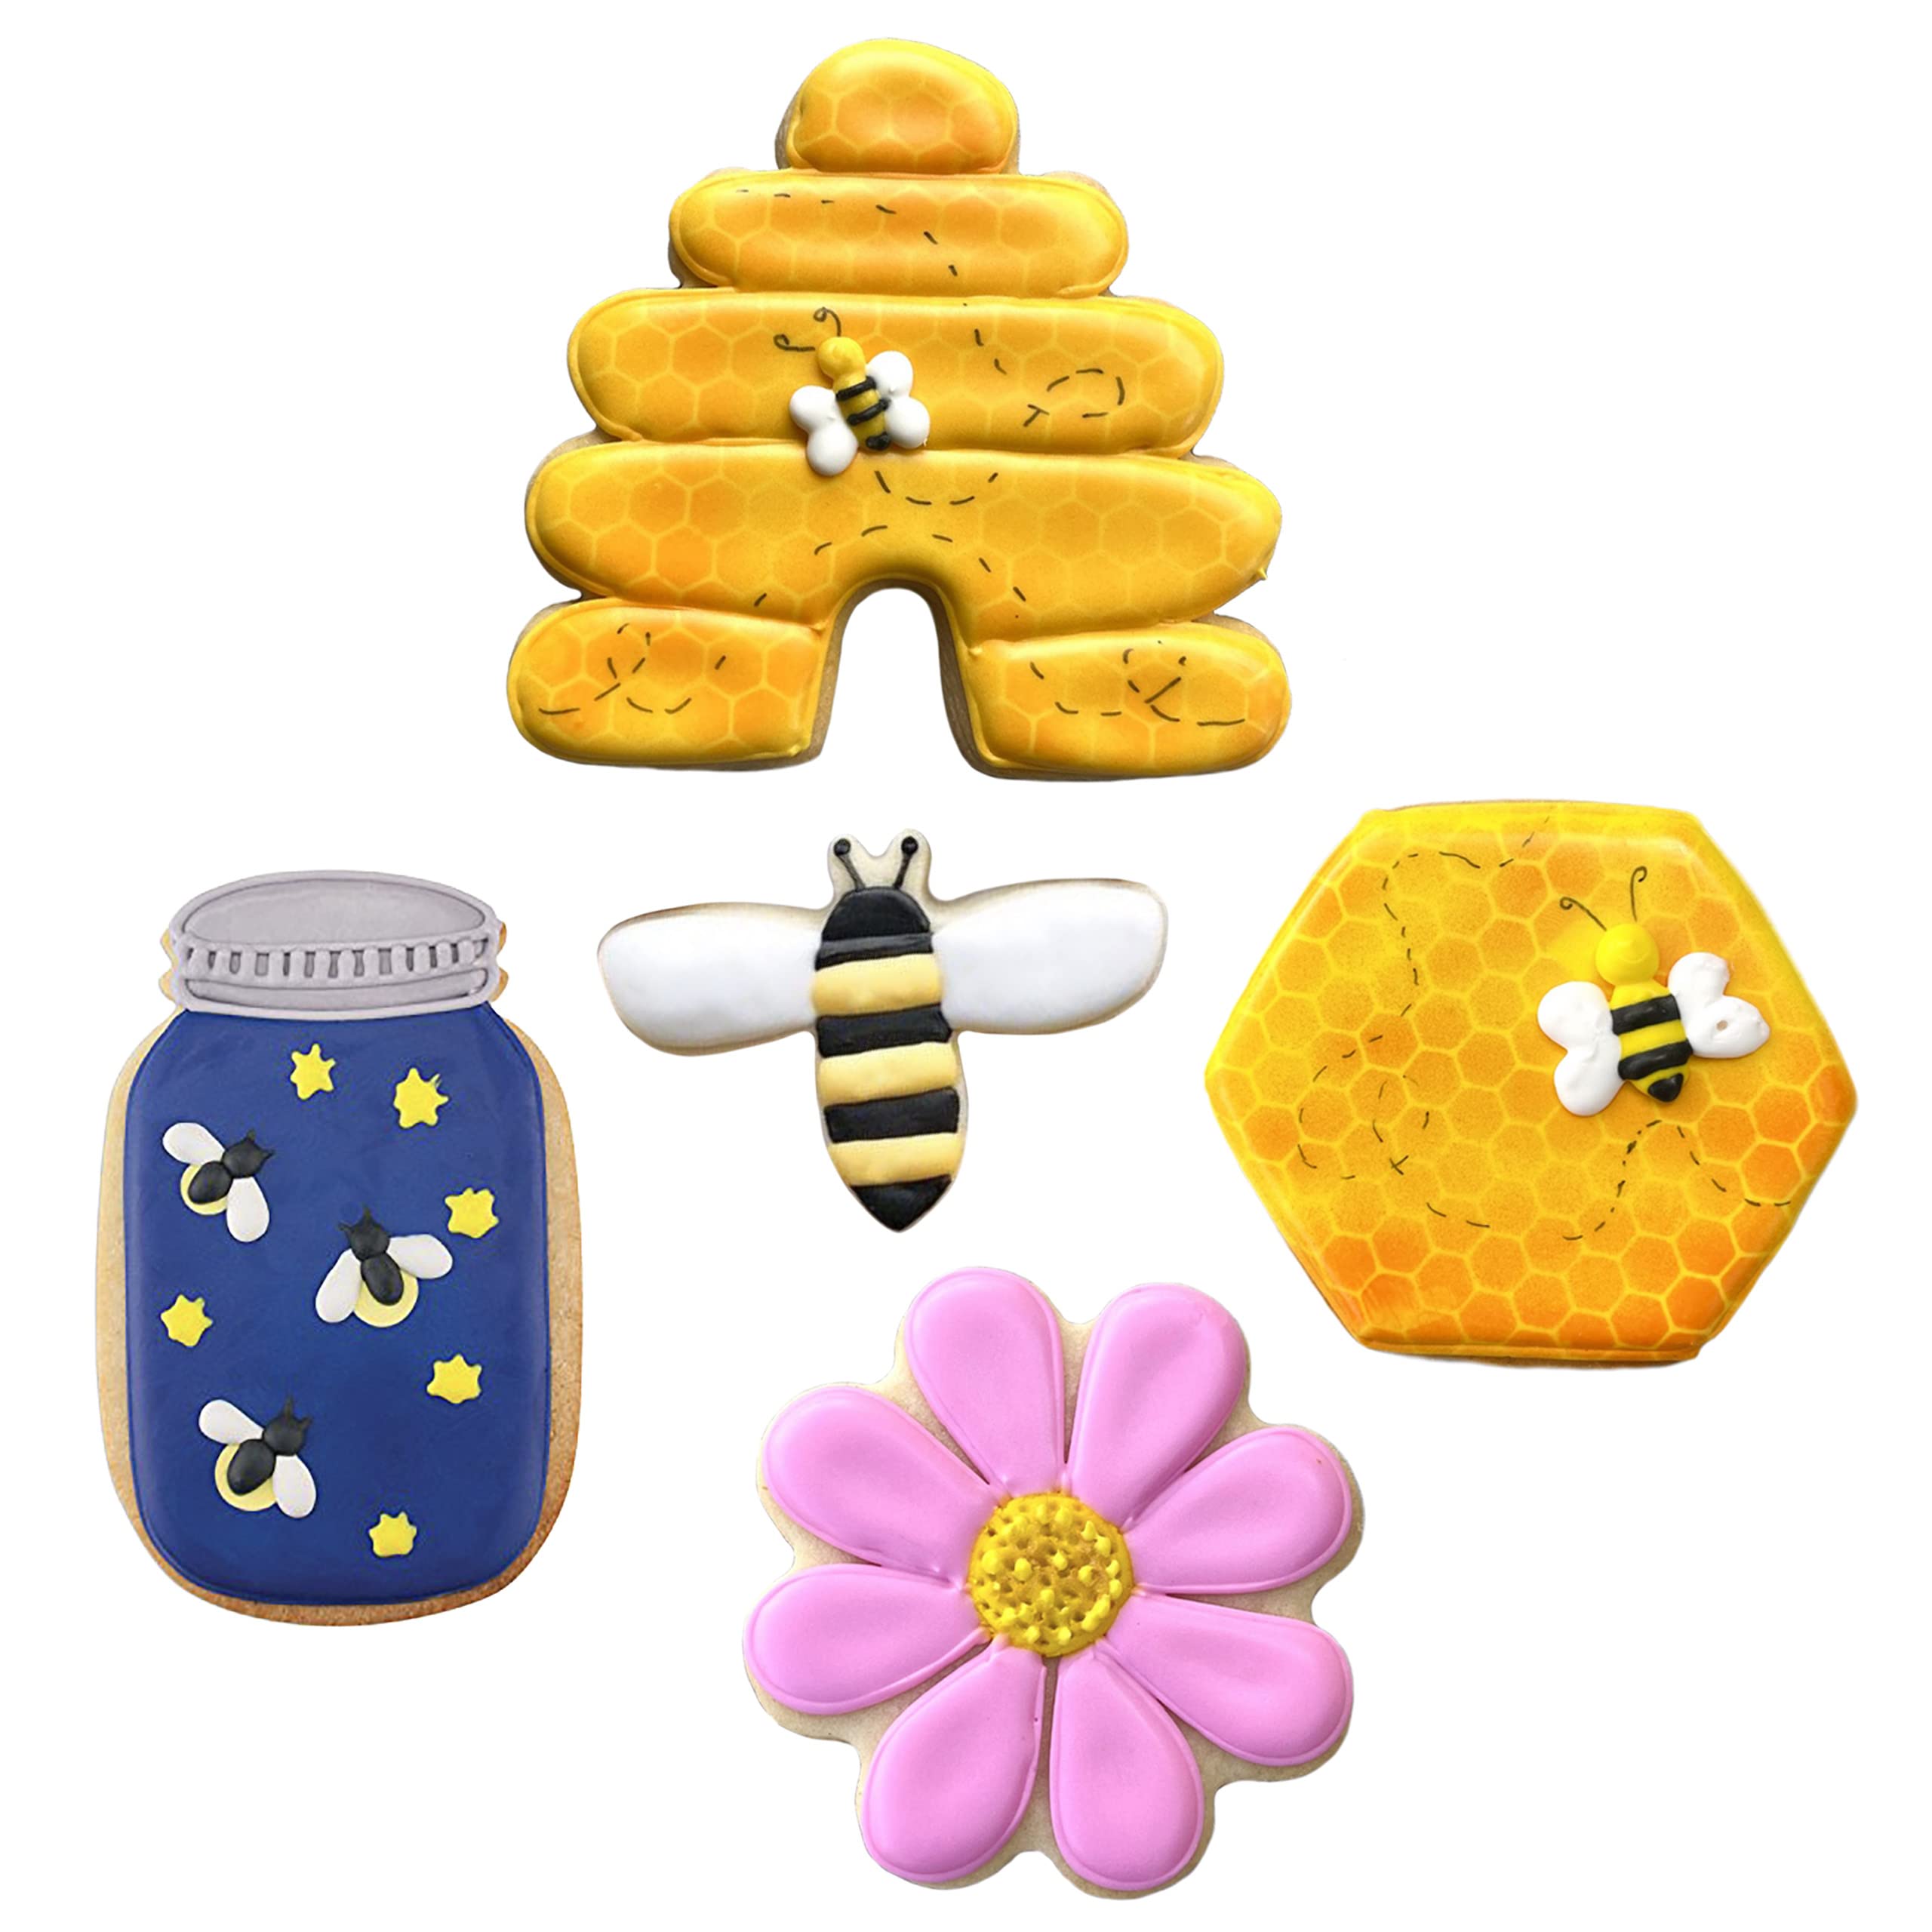 Bee Cookie Cutters 5-Pc. Set Made in the USA by Ann Clark, Bee, Beehive, Small Flower, Honeycomb, Honey Jar